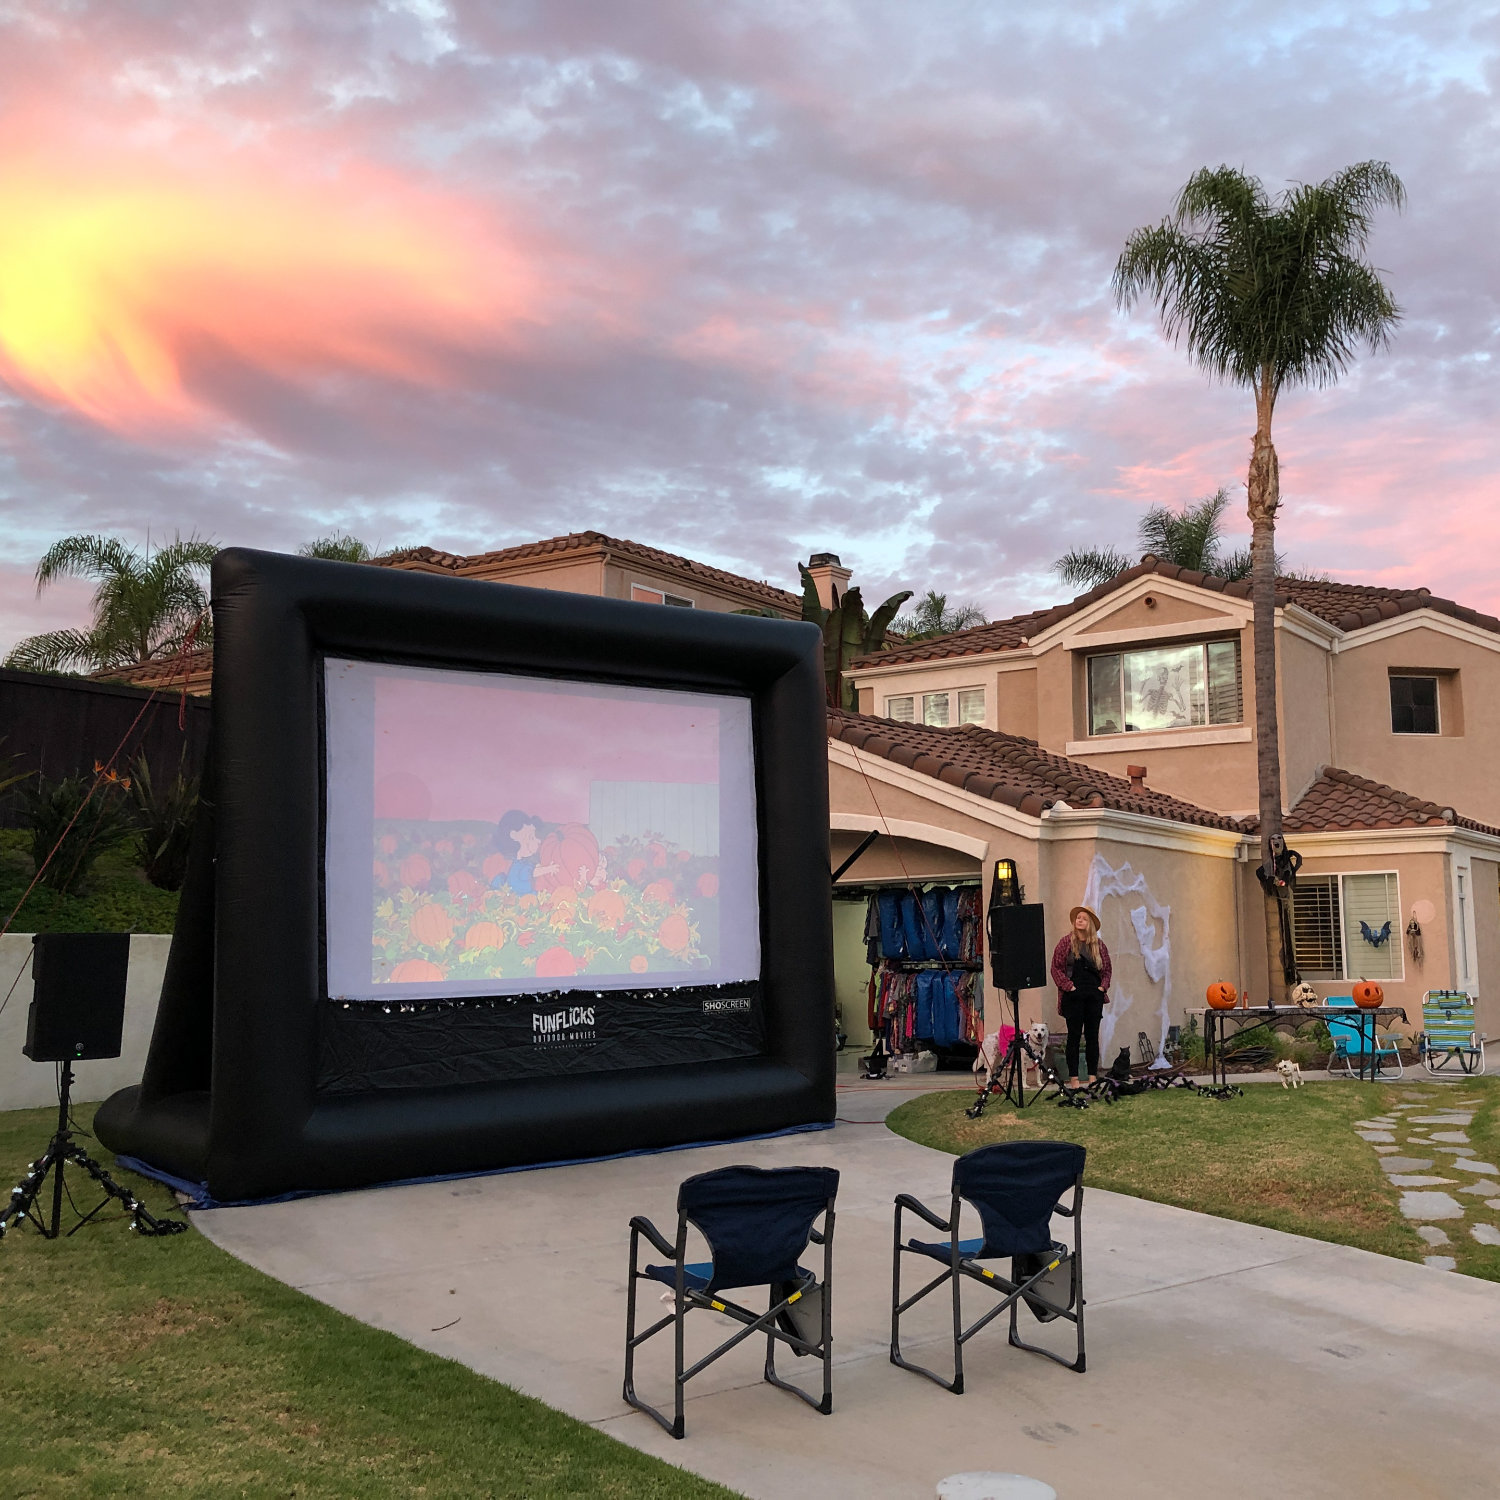 Showing a Halloween movie on a FunFlicks inflatable screen in the front yard.